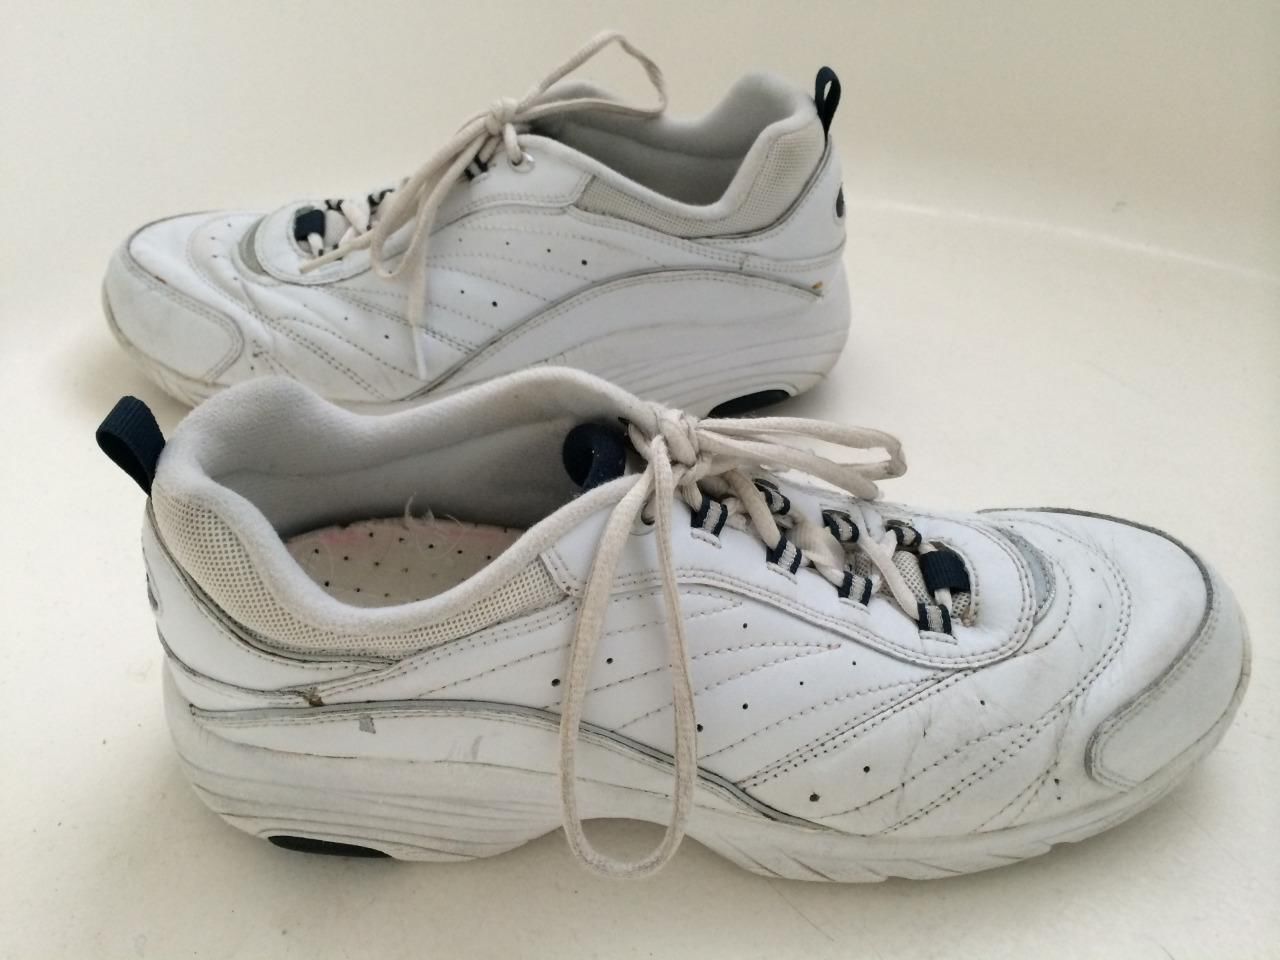 EASY SPIRIT WOMENS WHITE ATHLETIC WALKING SHOES SIZE 11 For Sale - Item ...